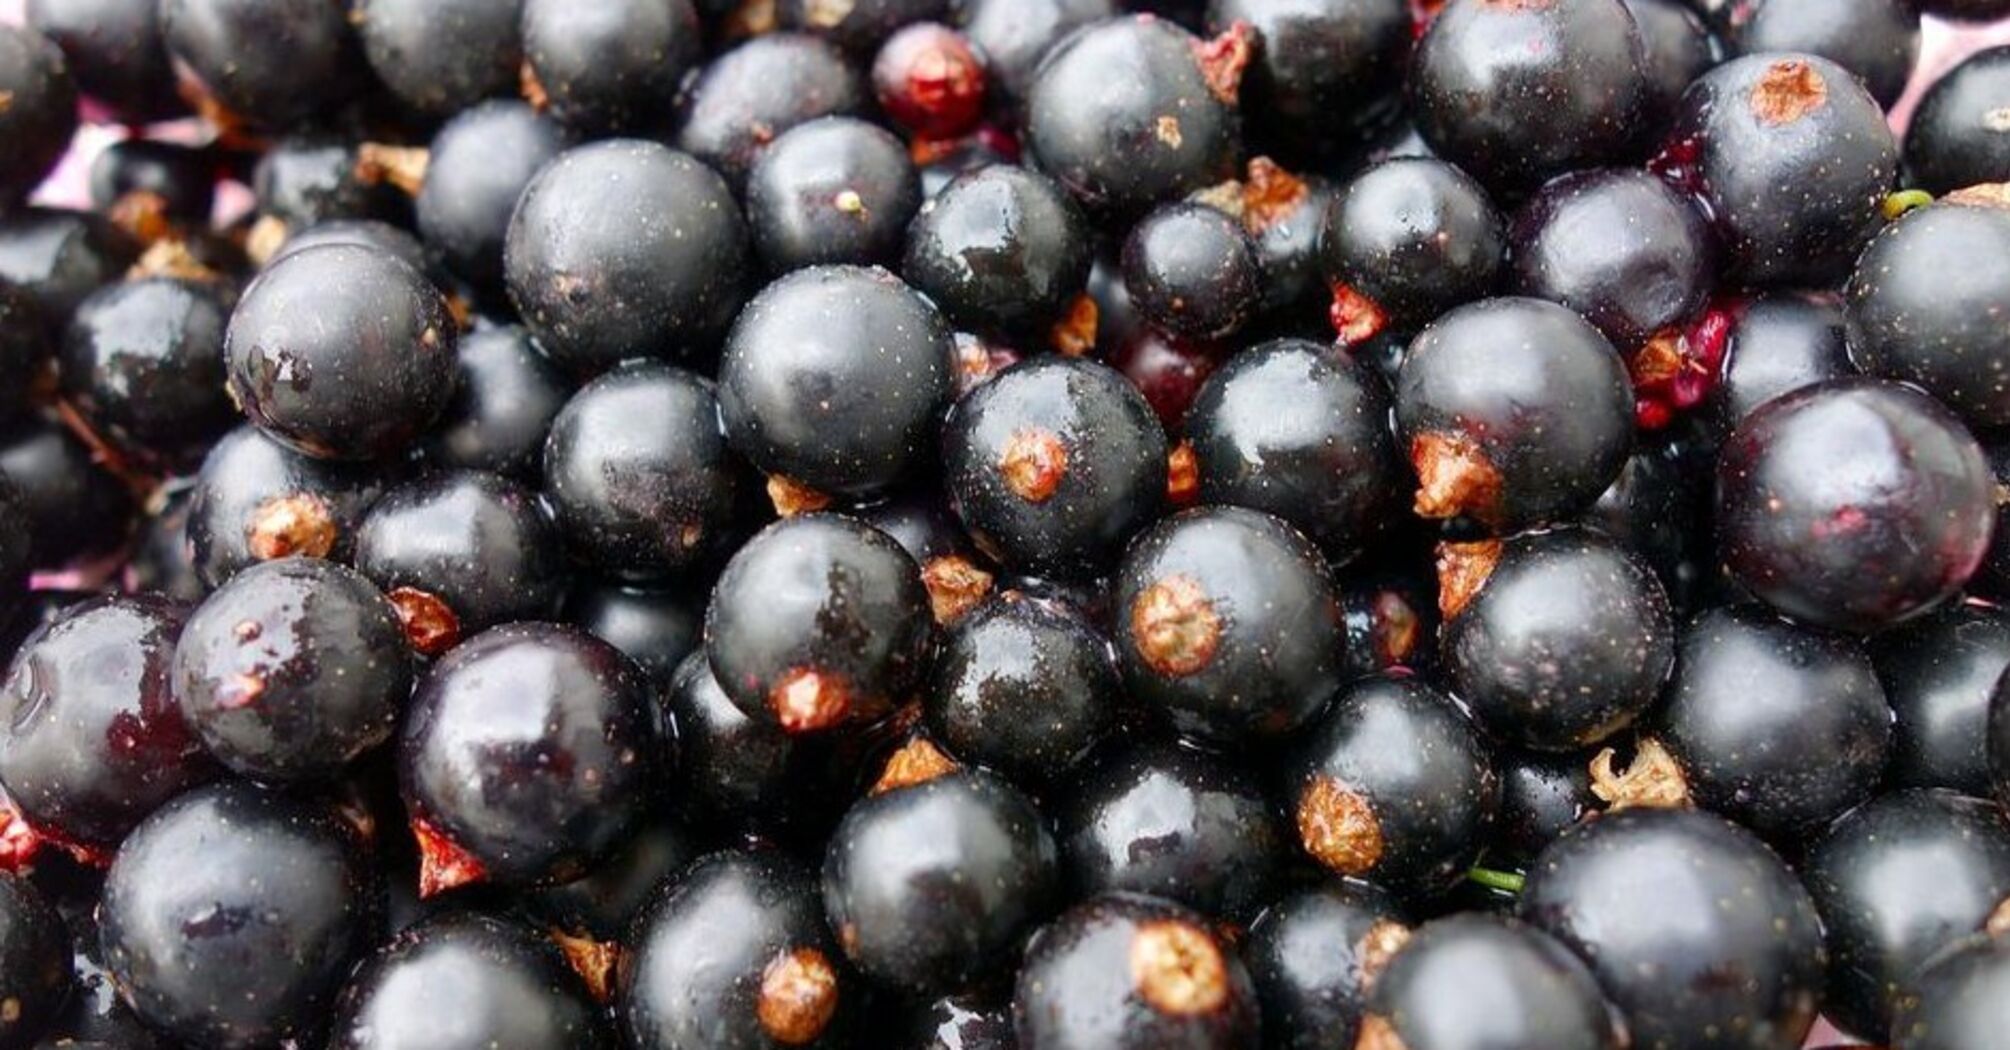 How to prepare currants with sugar for the winter: all the benefits of the berry are preserved